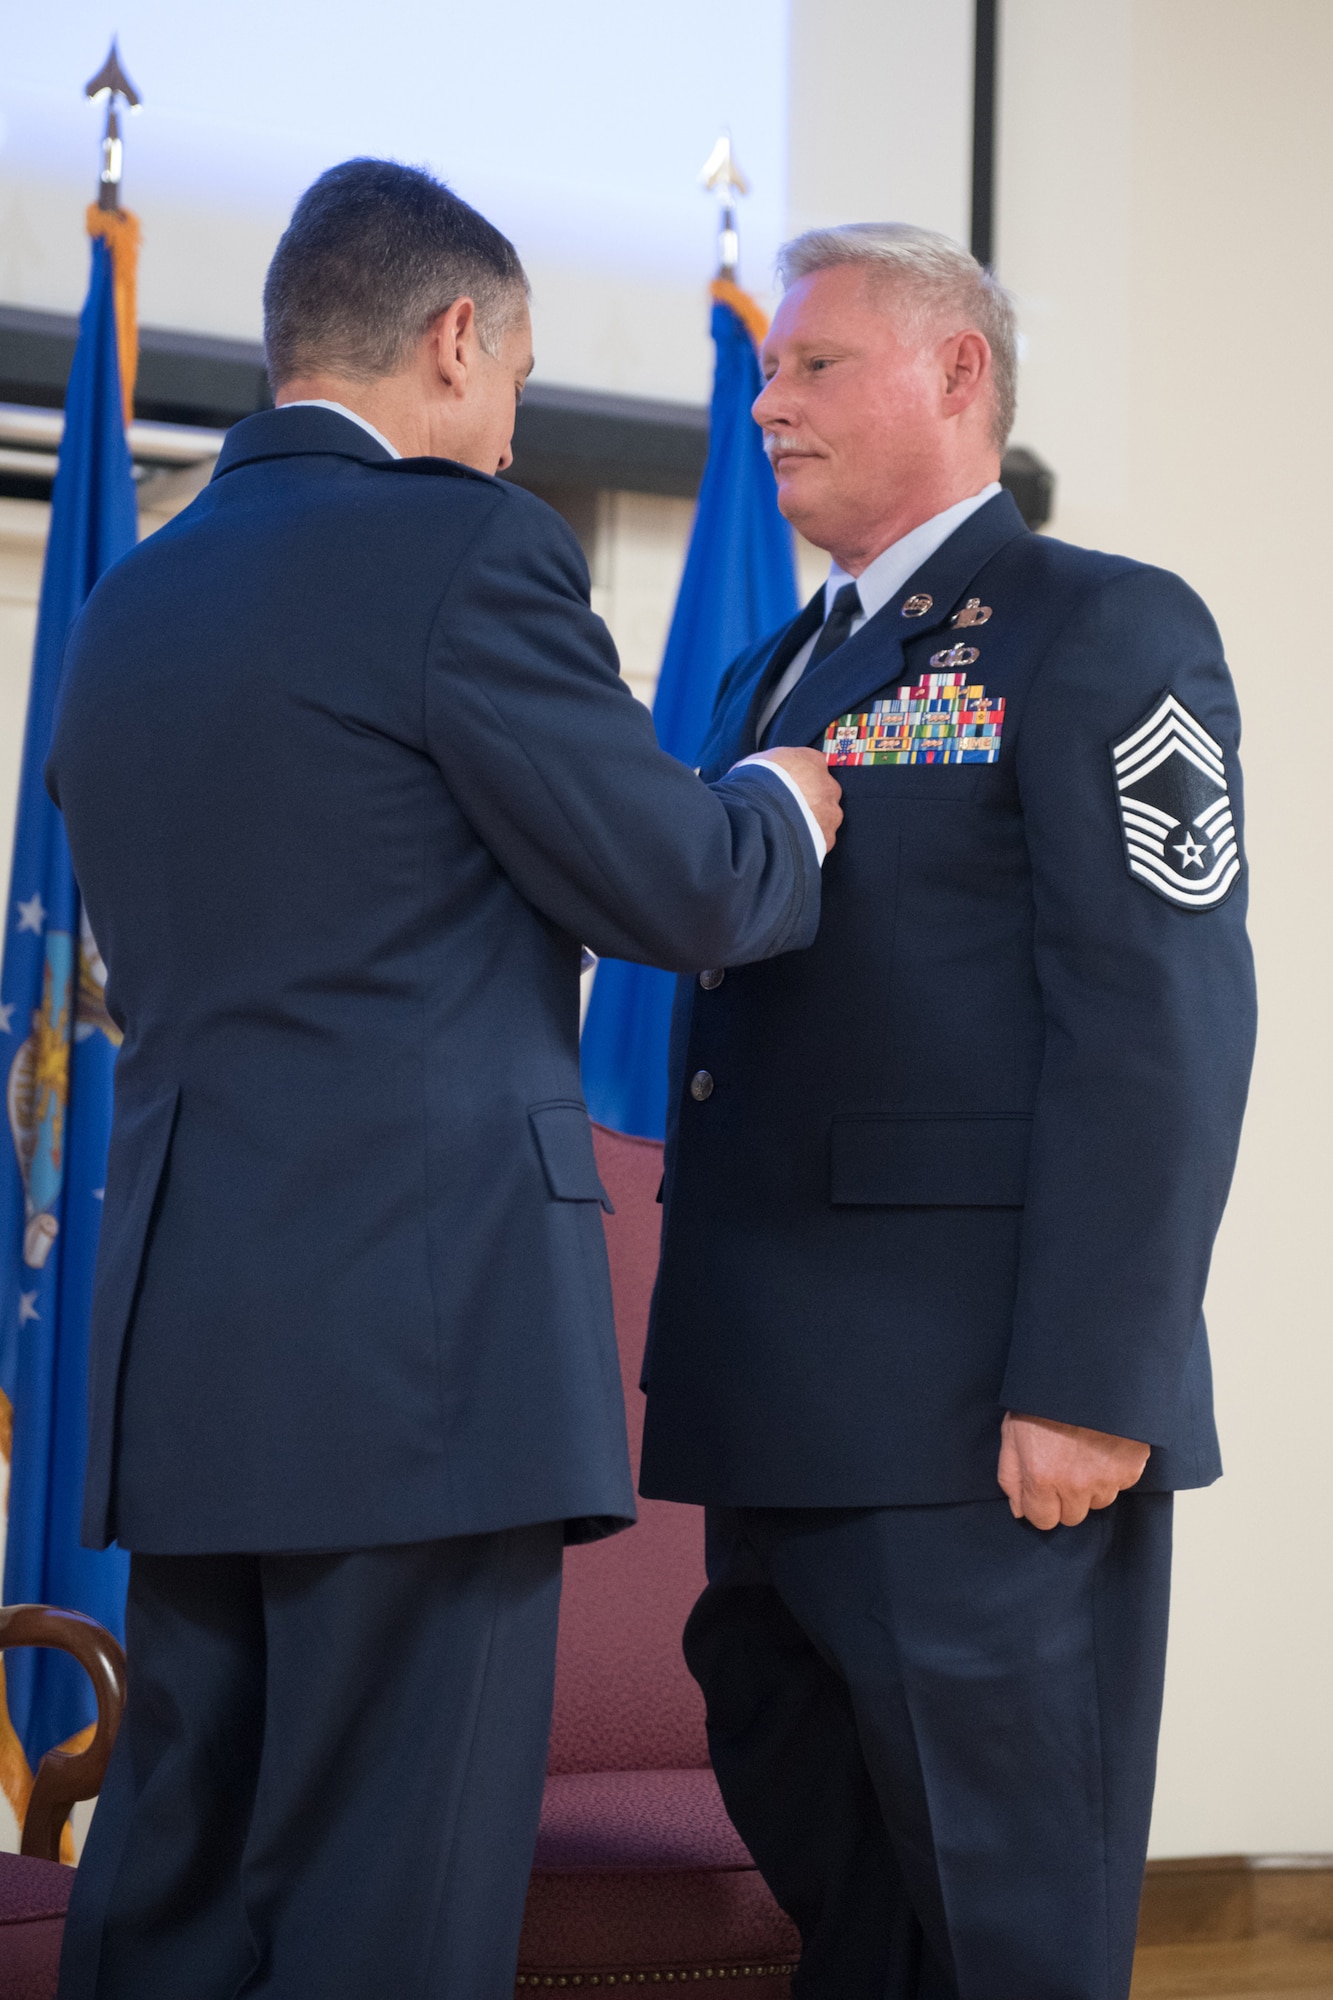 Brig. Gen. Warren Hurst, Kentucky's assistant adjutant general for Air, pins the Meritorious Service Medal on Chief Master Sgt. Joseph E. Atwell Jr. during Atwell’s retirement ceremony at the Kentucky Air National Guard Base in Louisville, Ky., April 15, 2018. Atwell’s career spanned more than 30 years in both the active-duty Air Force and Kentucky Air National Guard. (U.S. Air National Guard photo by Master Sgt. Vicky Spesard)